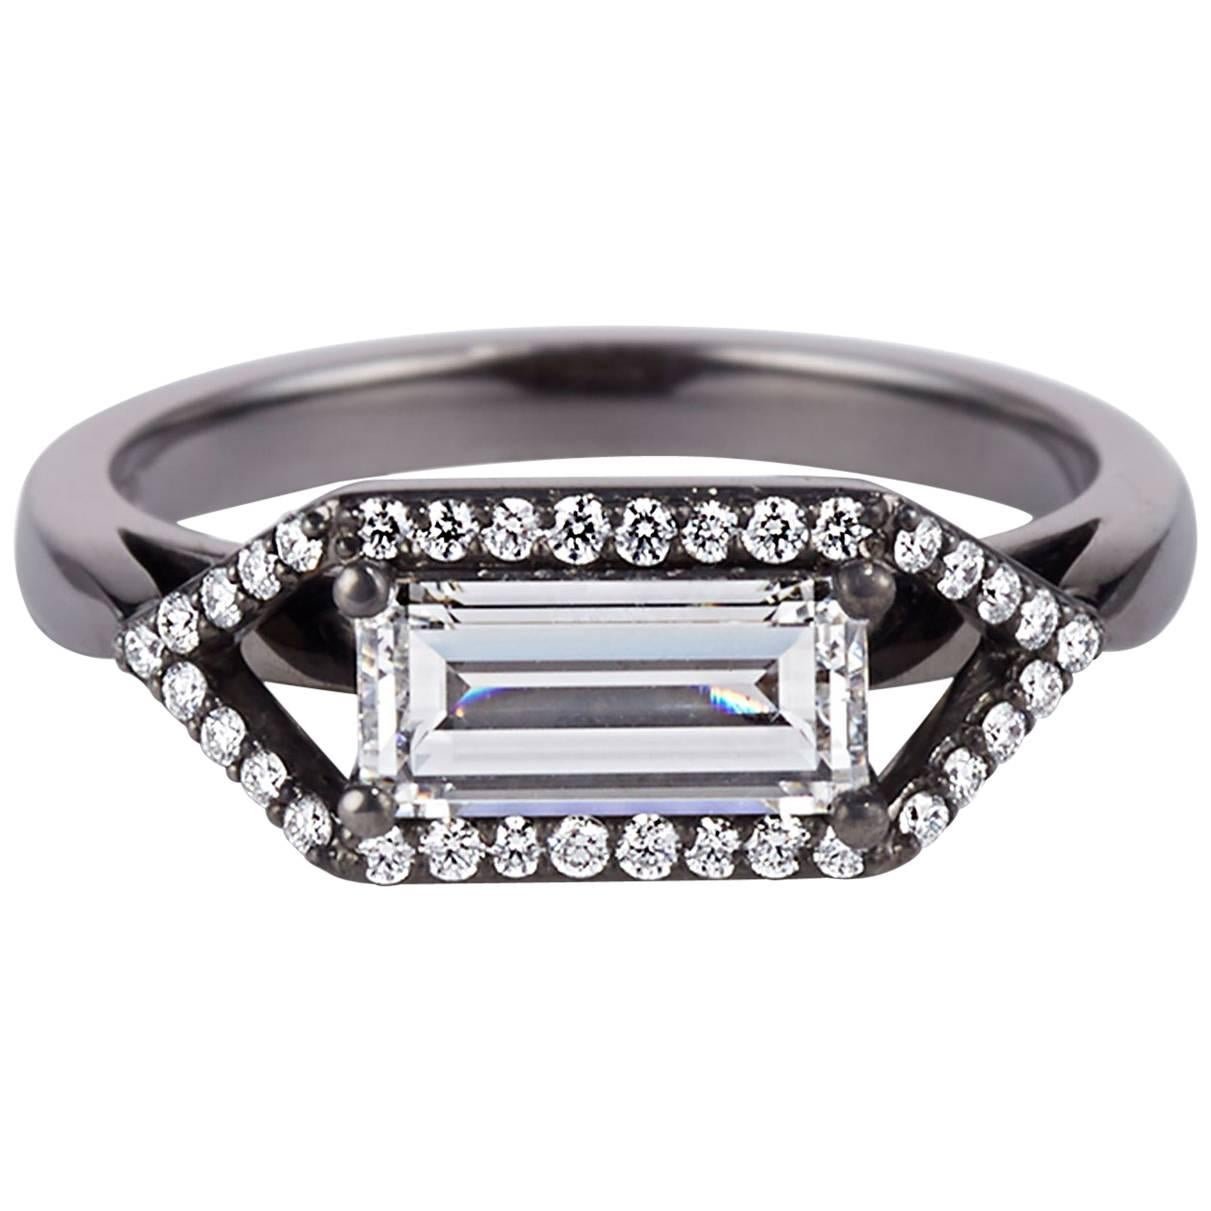 Cushla Whiting 'Zola' Emerald Cut 1.01 Carat Diamond Engagement Ring Set in Gold For Sale